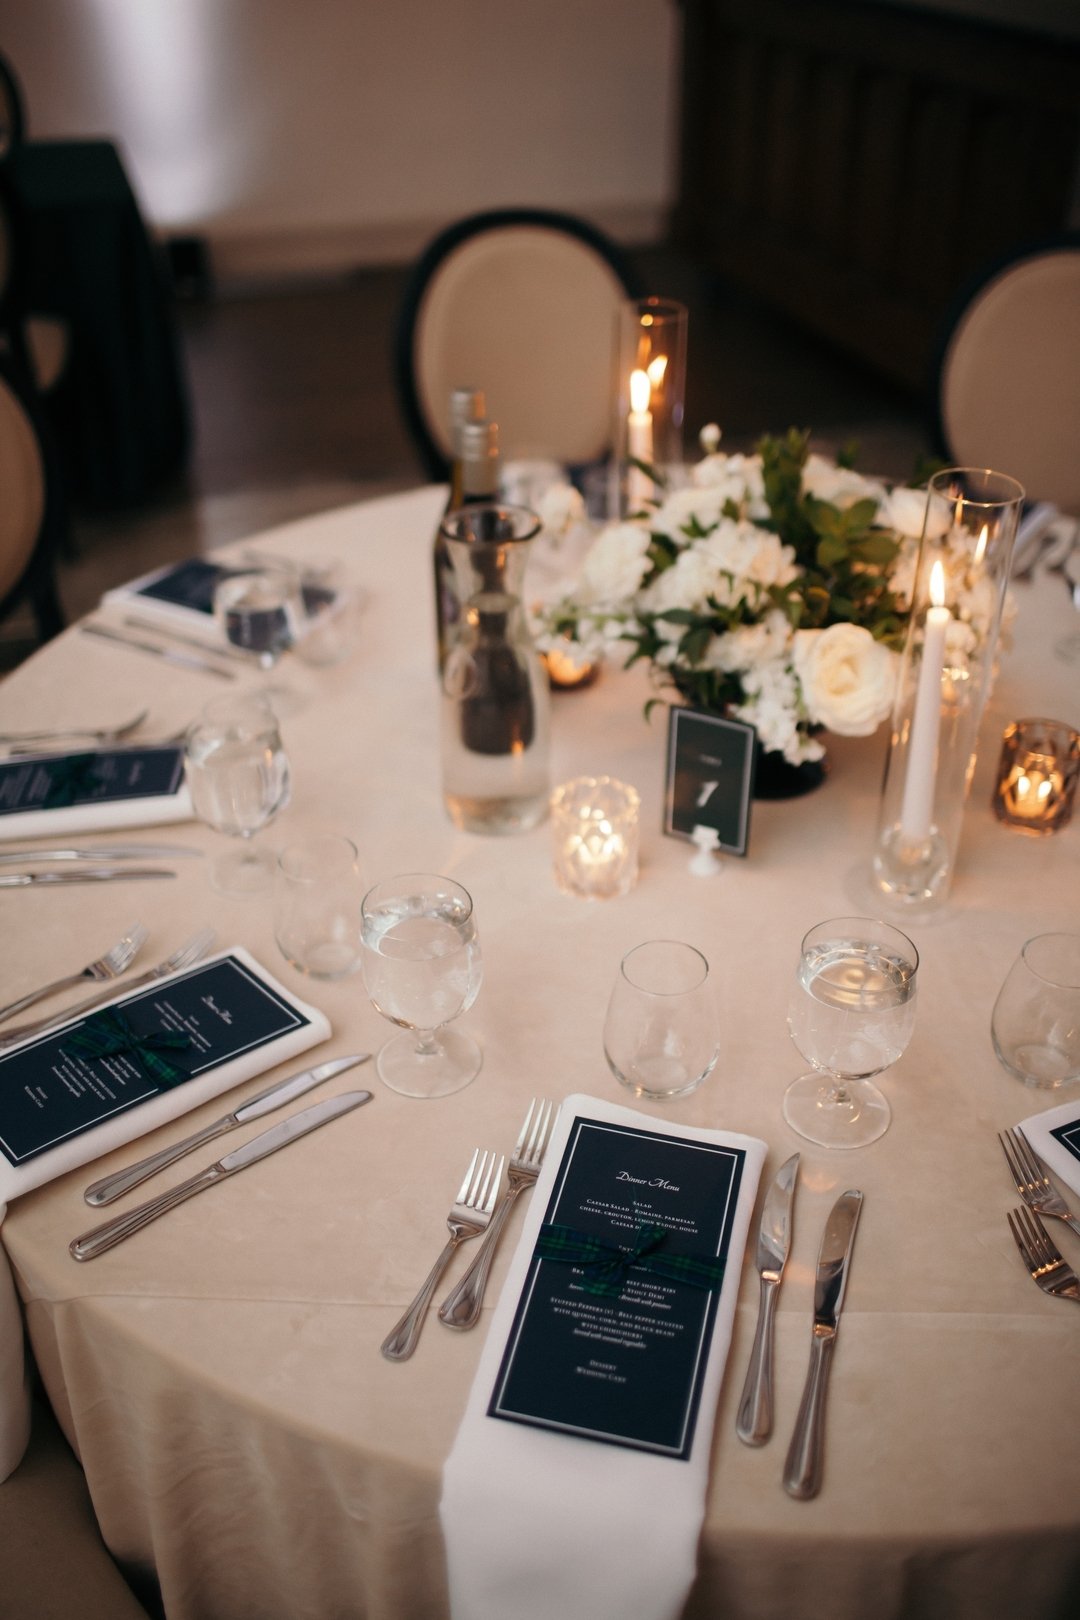 A touch of tartan for Kelly and Ryan&rsquo;s wedding menus with @eventstoat. Beautifully captured by @cassierosch